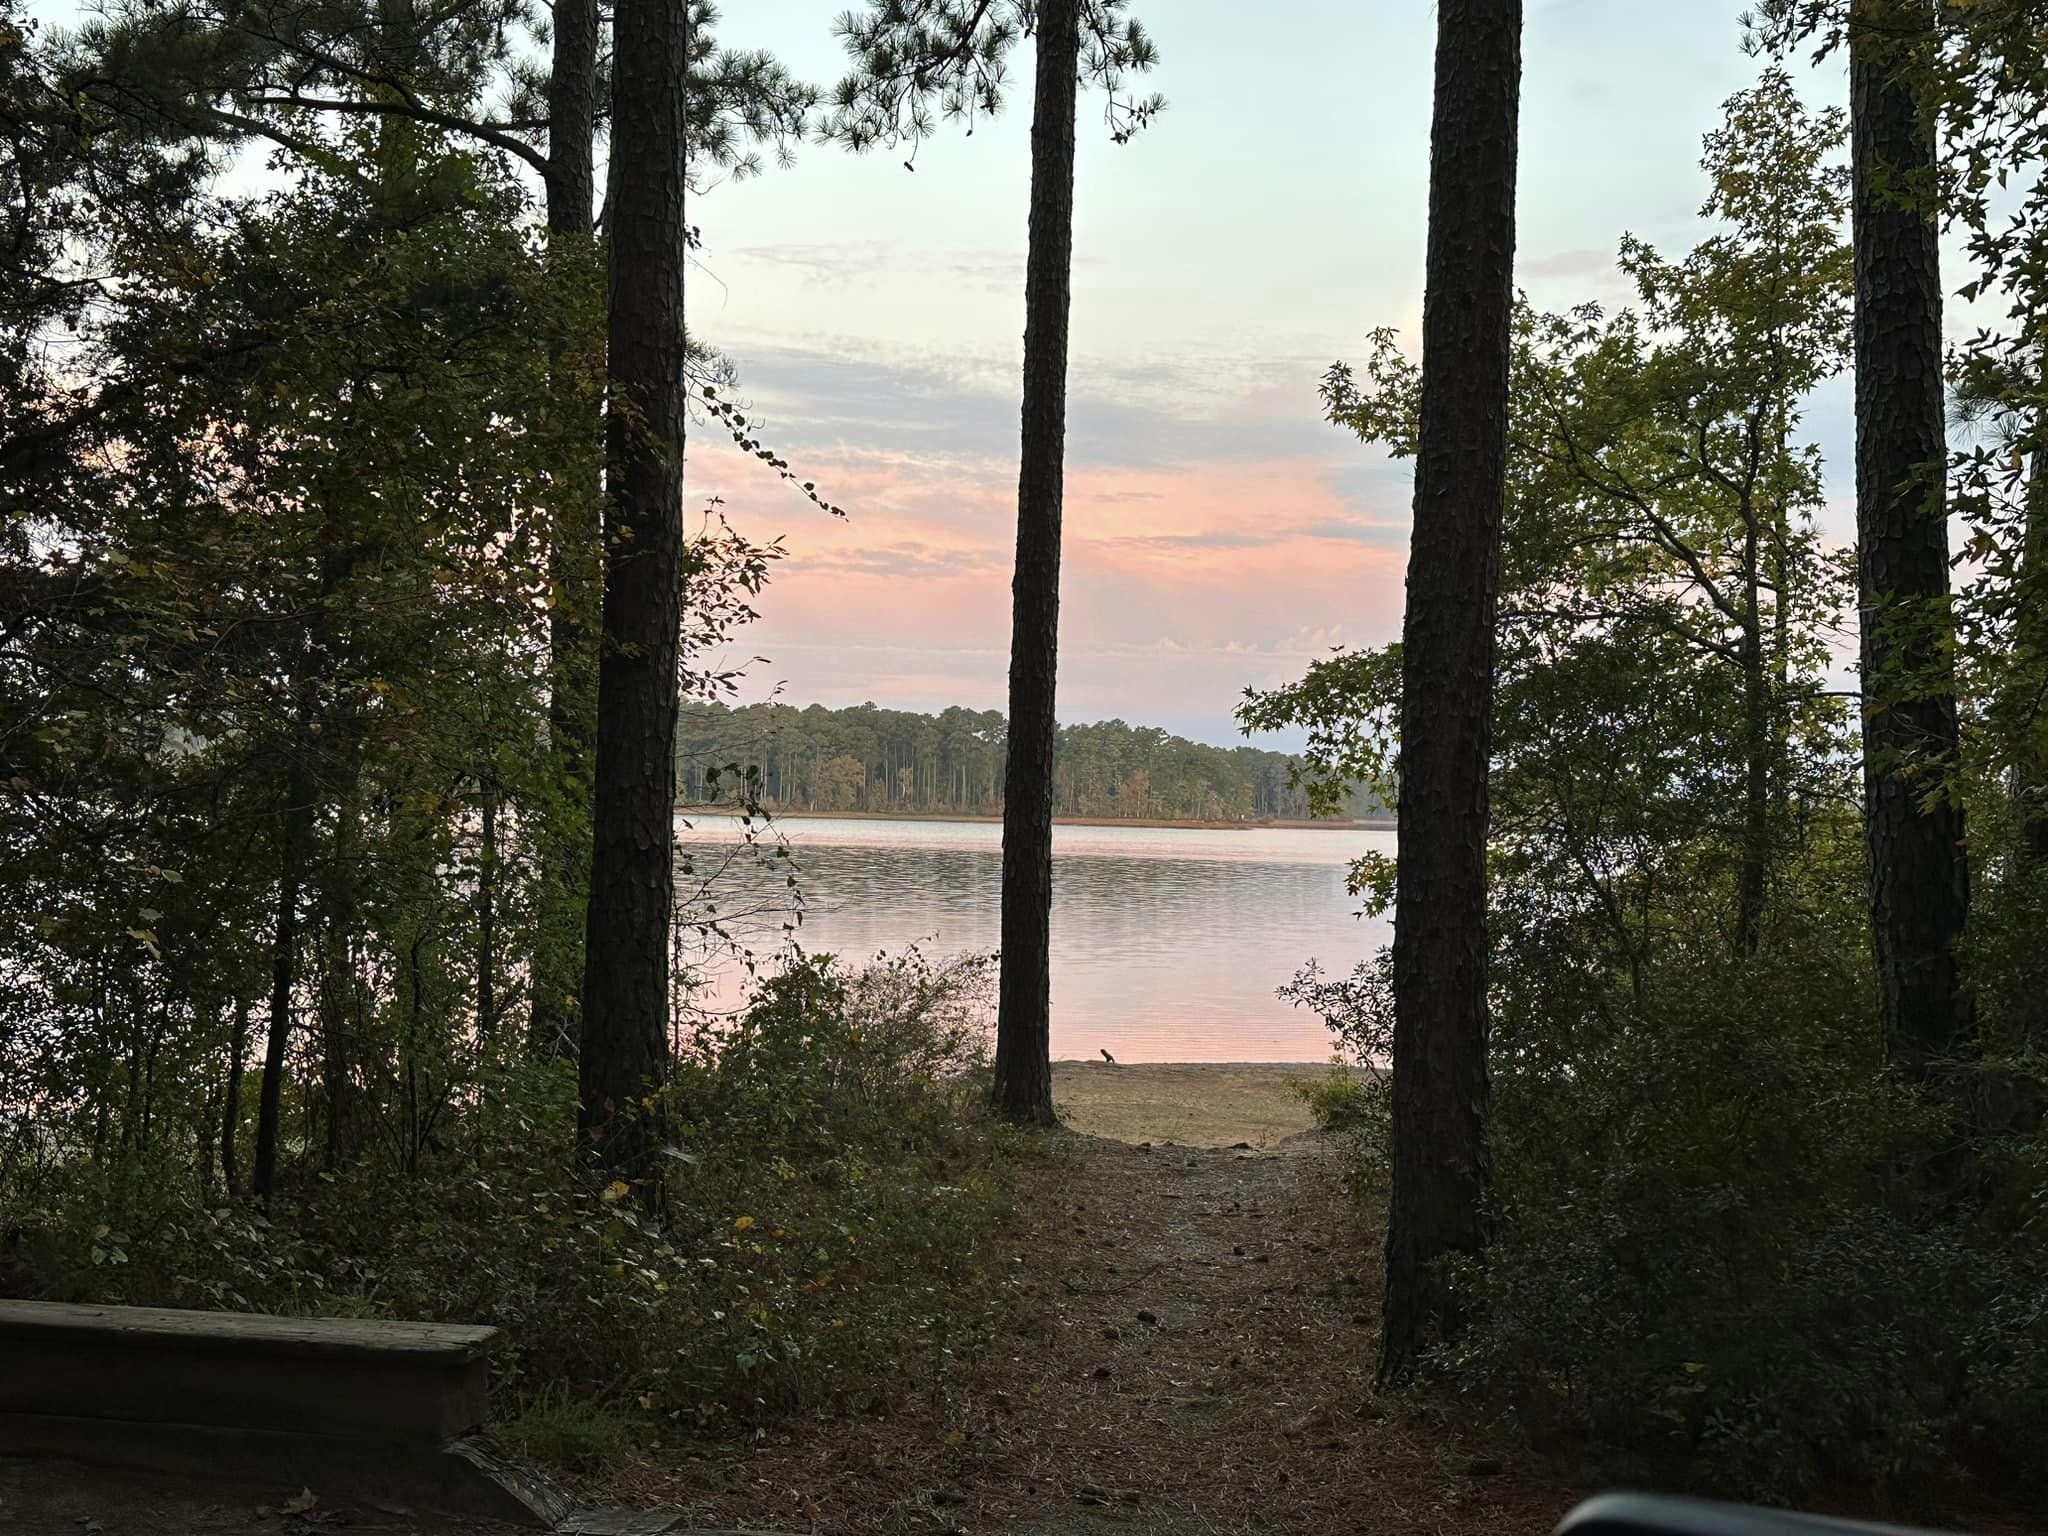 Imagine waking up to this beautiful view in the morning. Book a camp site at Raysville Campground today! Link in bio to book your campsite